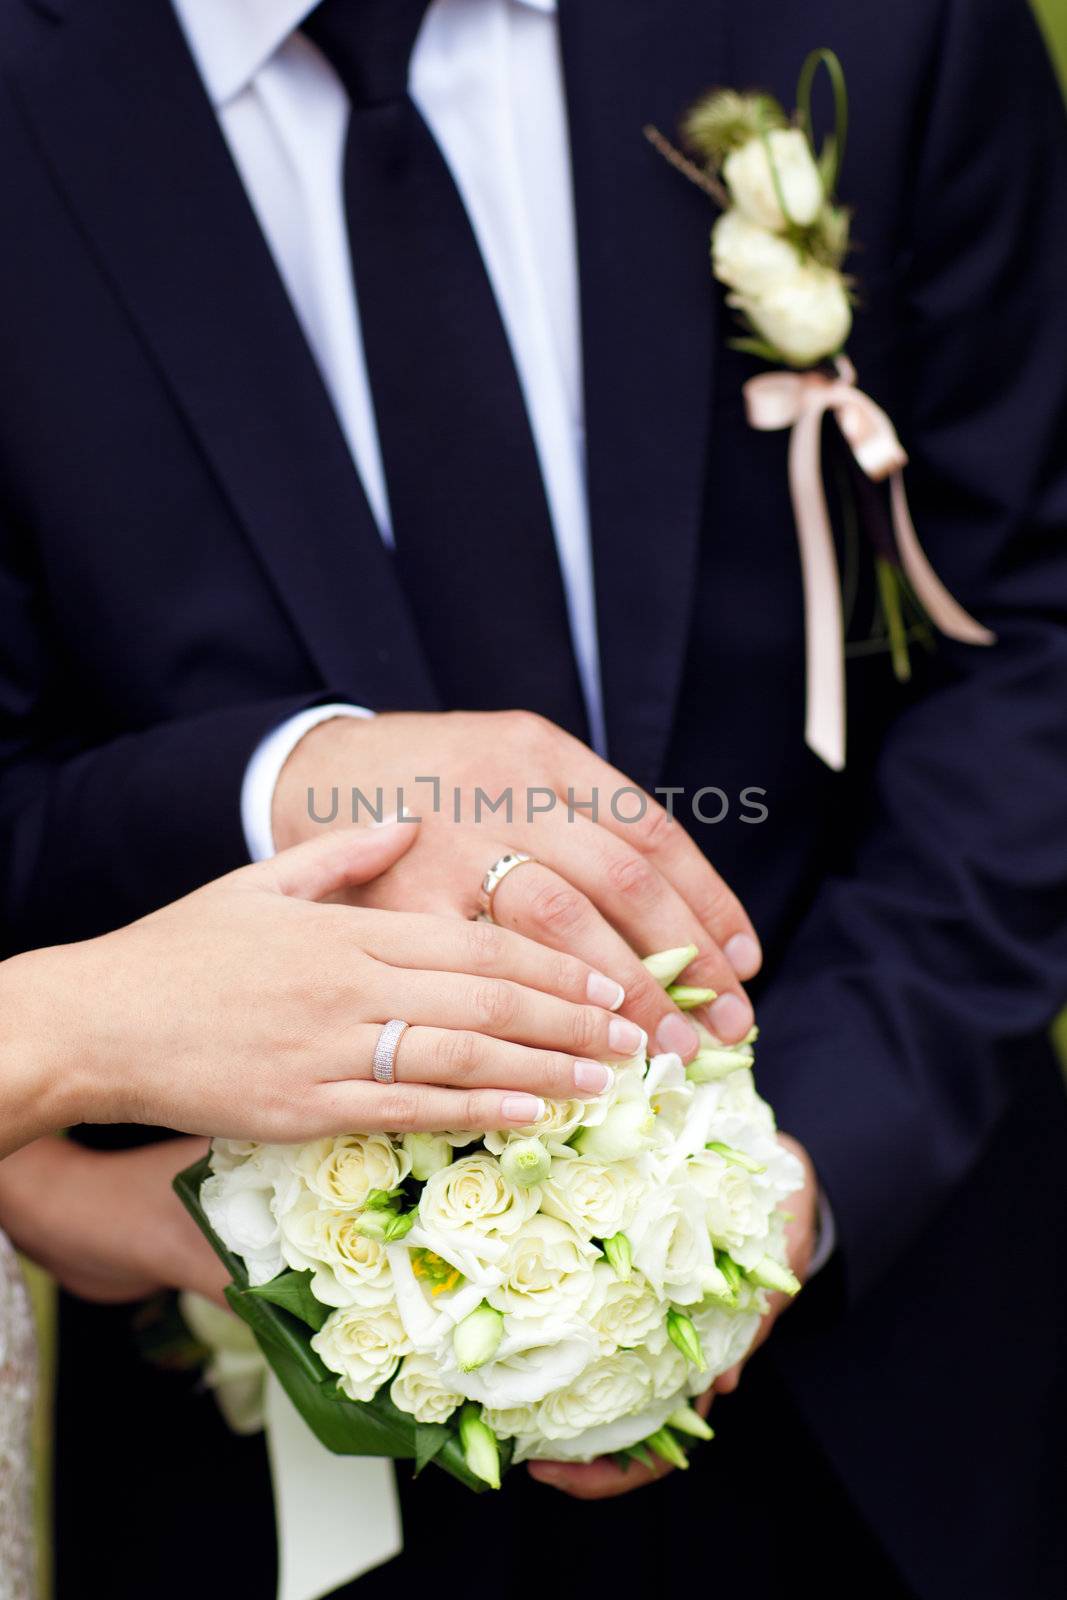 bouquet and wedding rings by vsurkov